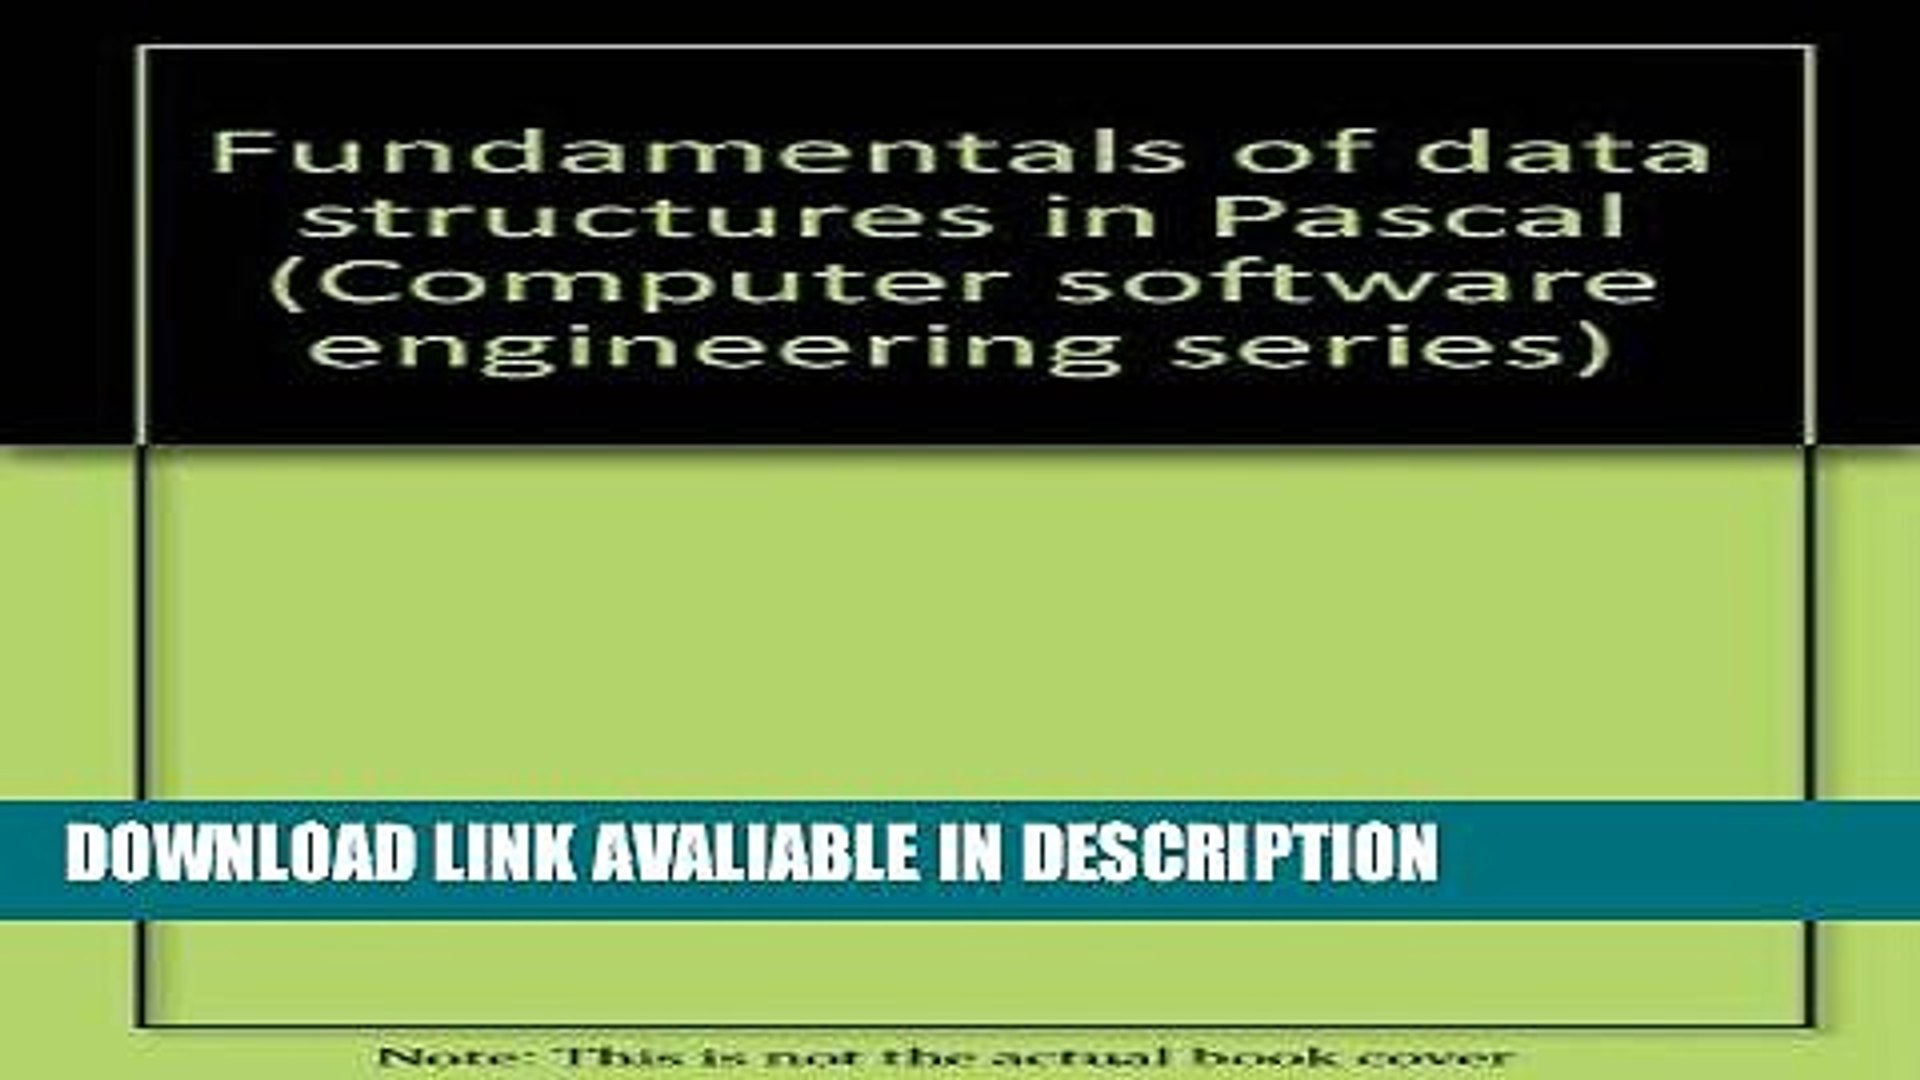 [PDF] Fundamentals of data structures in Pascal (Computer software engineering series) Download